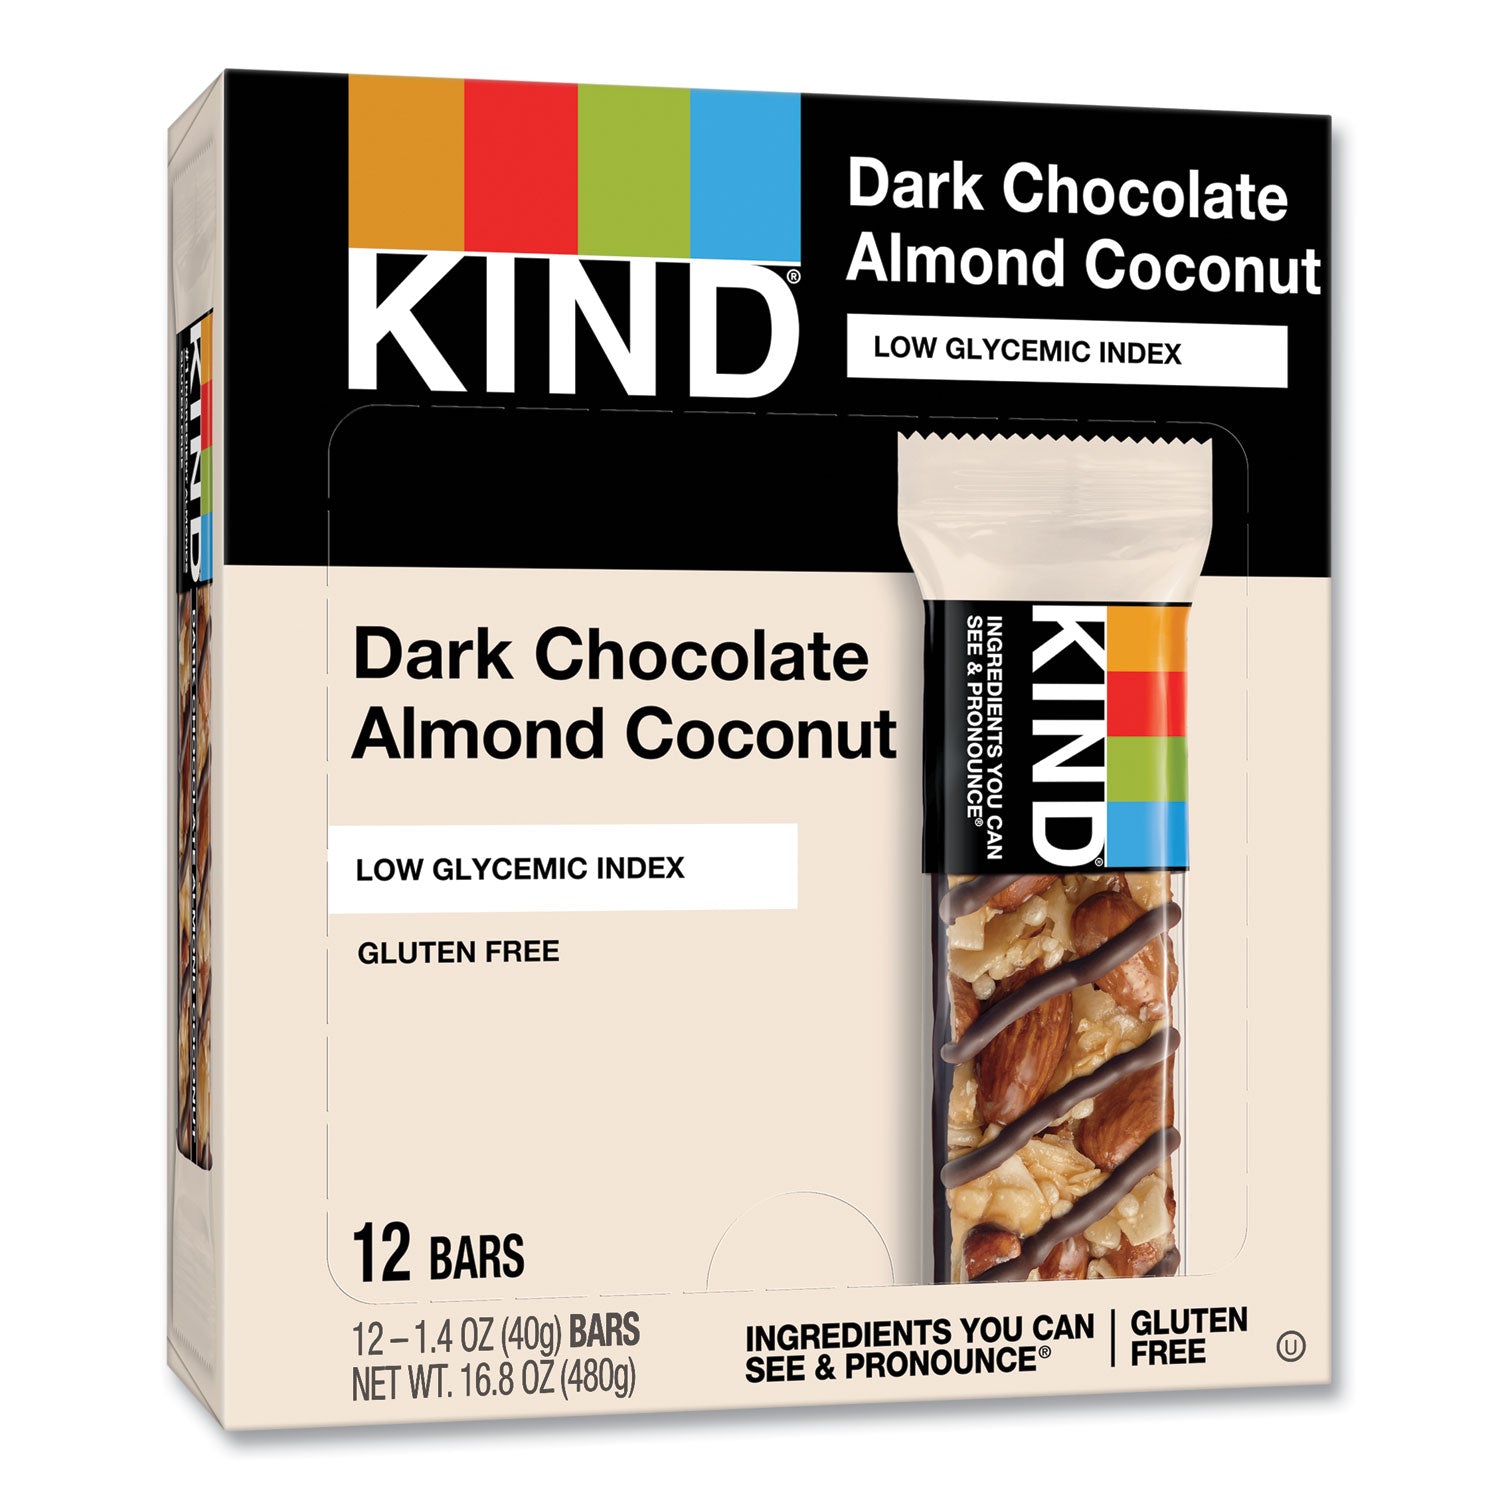 fruit-and-nut-bars-dark-chocolate-almond-and-coconut-14-oz-bar-12-box_knd19987 - 7